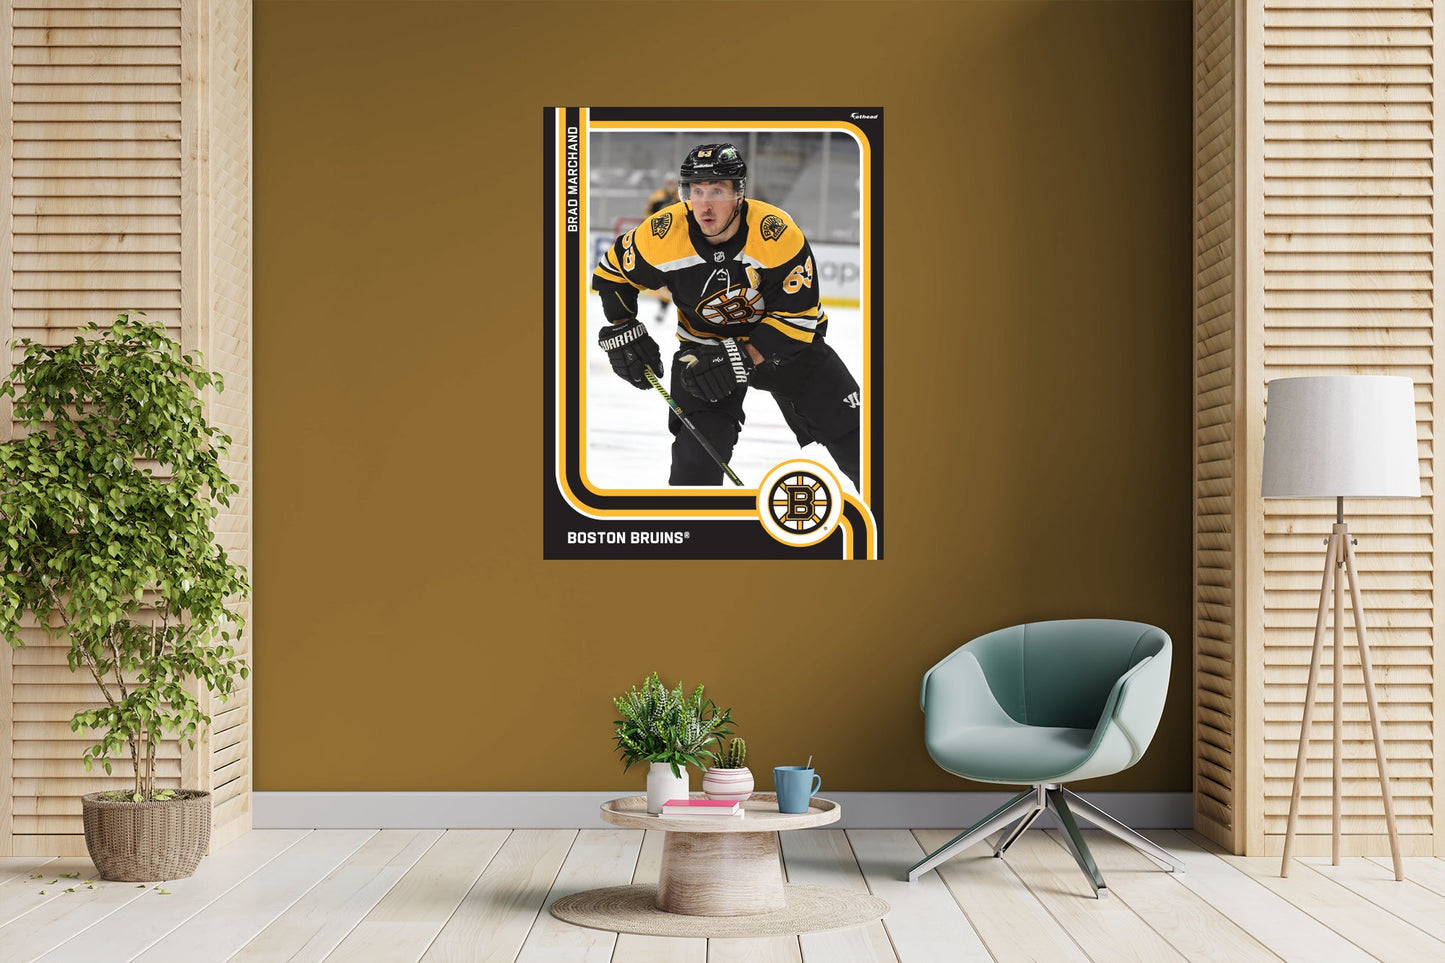 Boston Bruins: Brad Marchand Poster - Officially Licensed NHL Removable Adhesive Decal